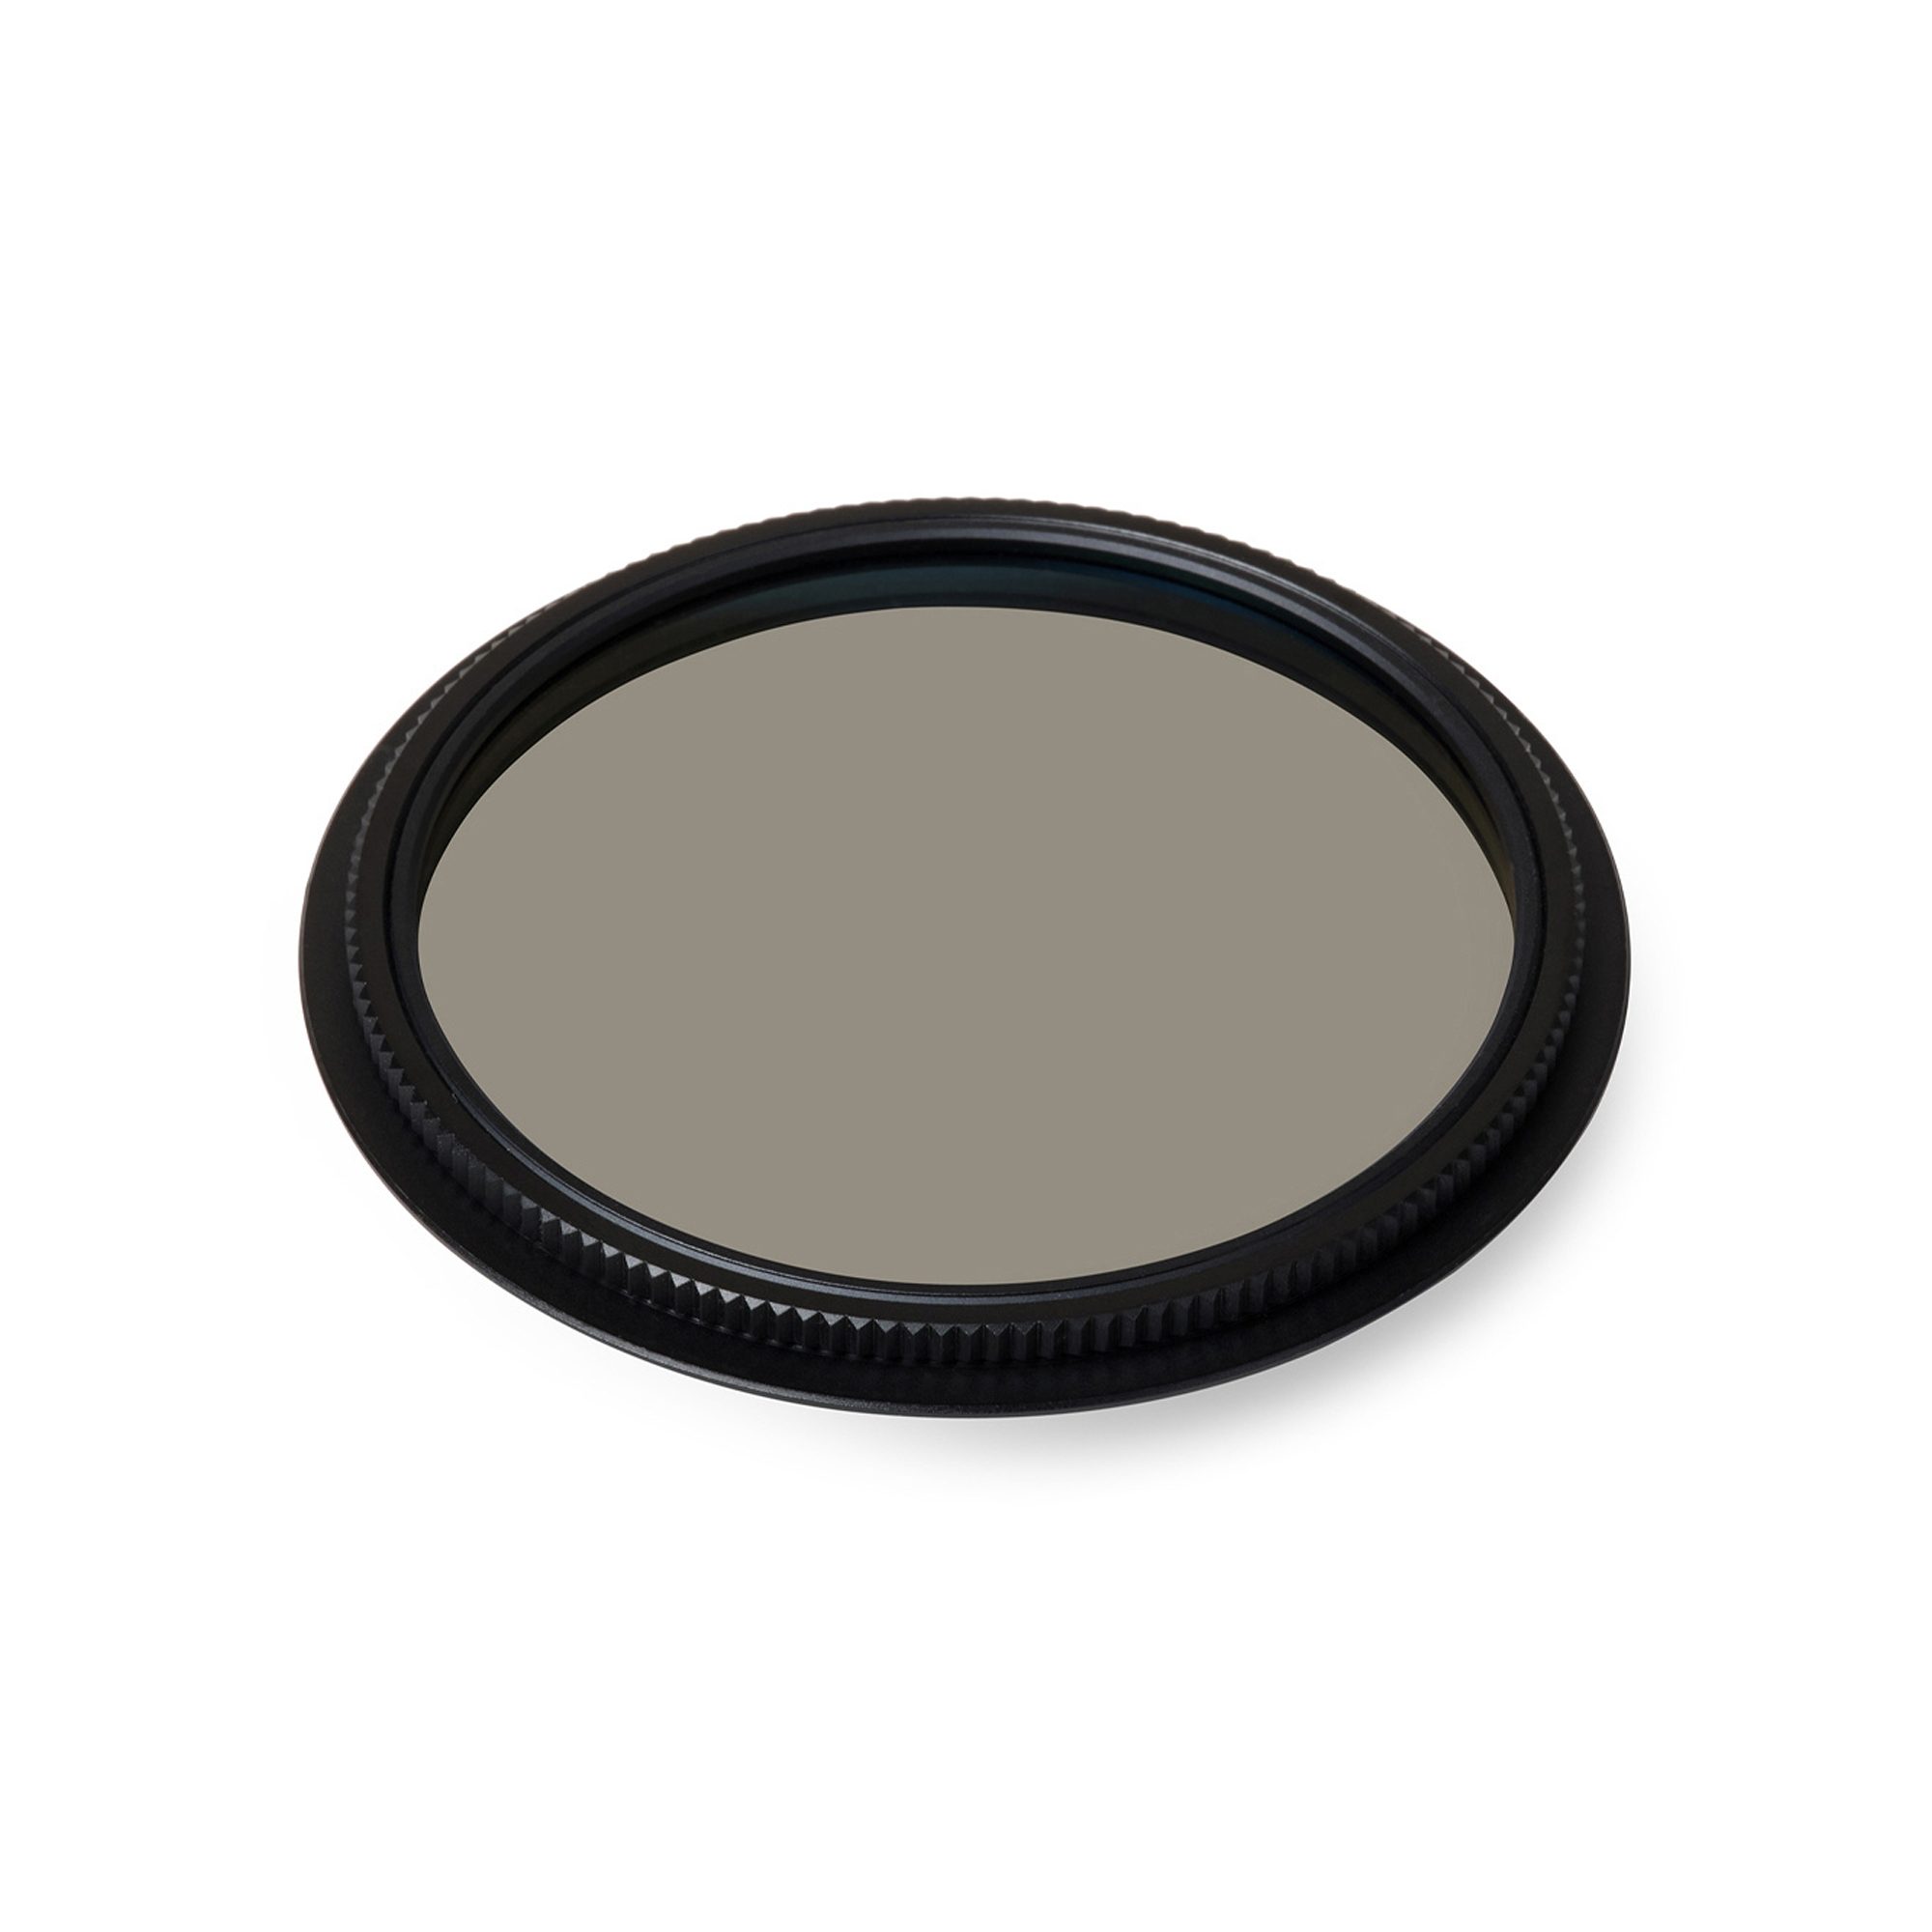 Urth 67mm CPL w/Rotating Adapter - 75mm Square Filter Holder